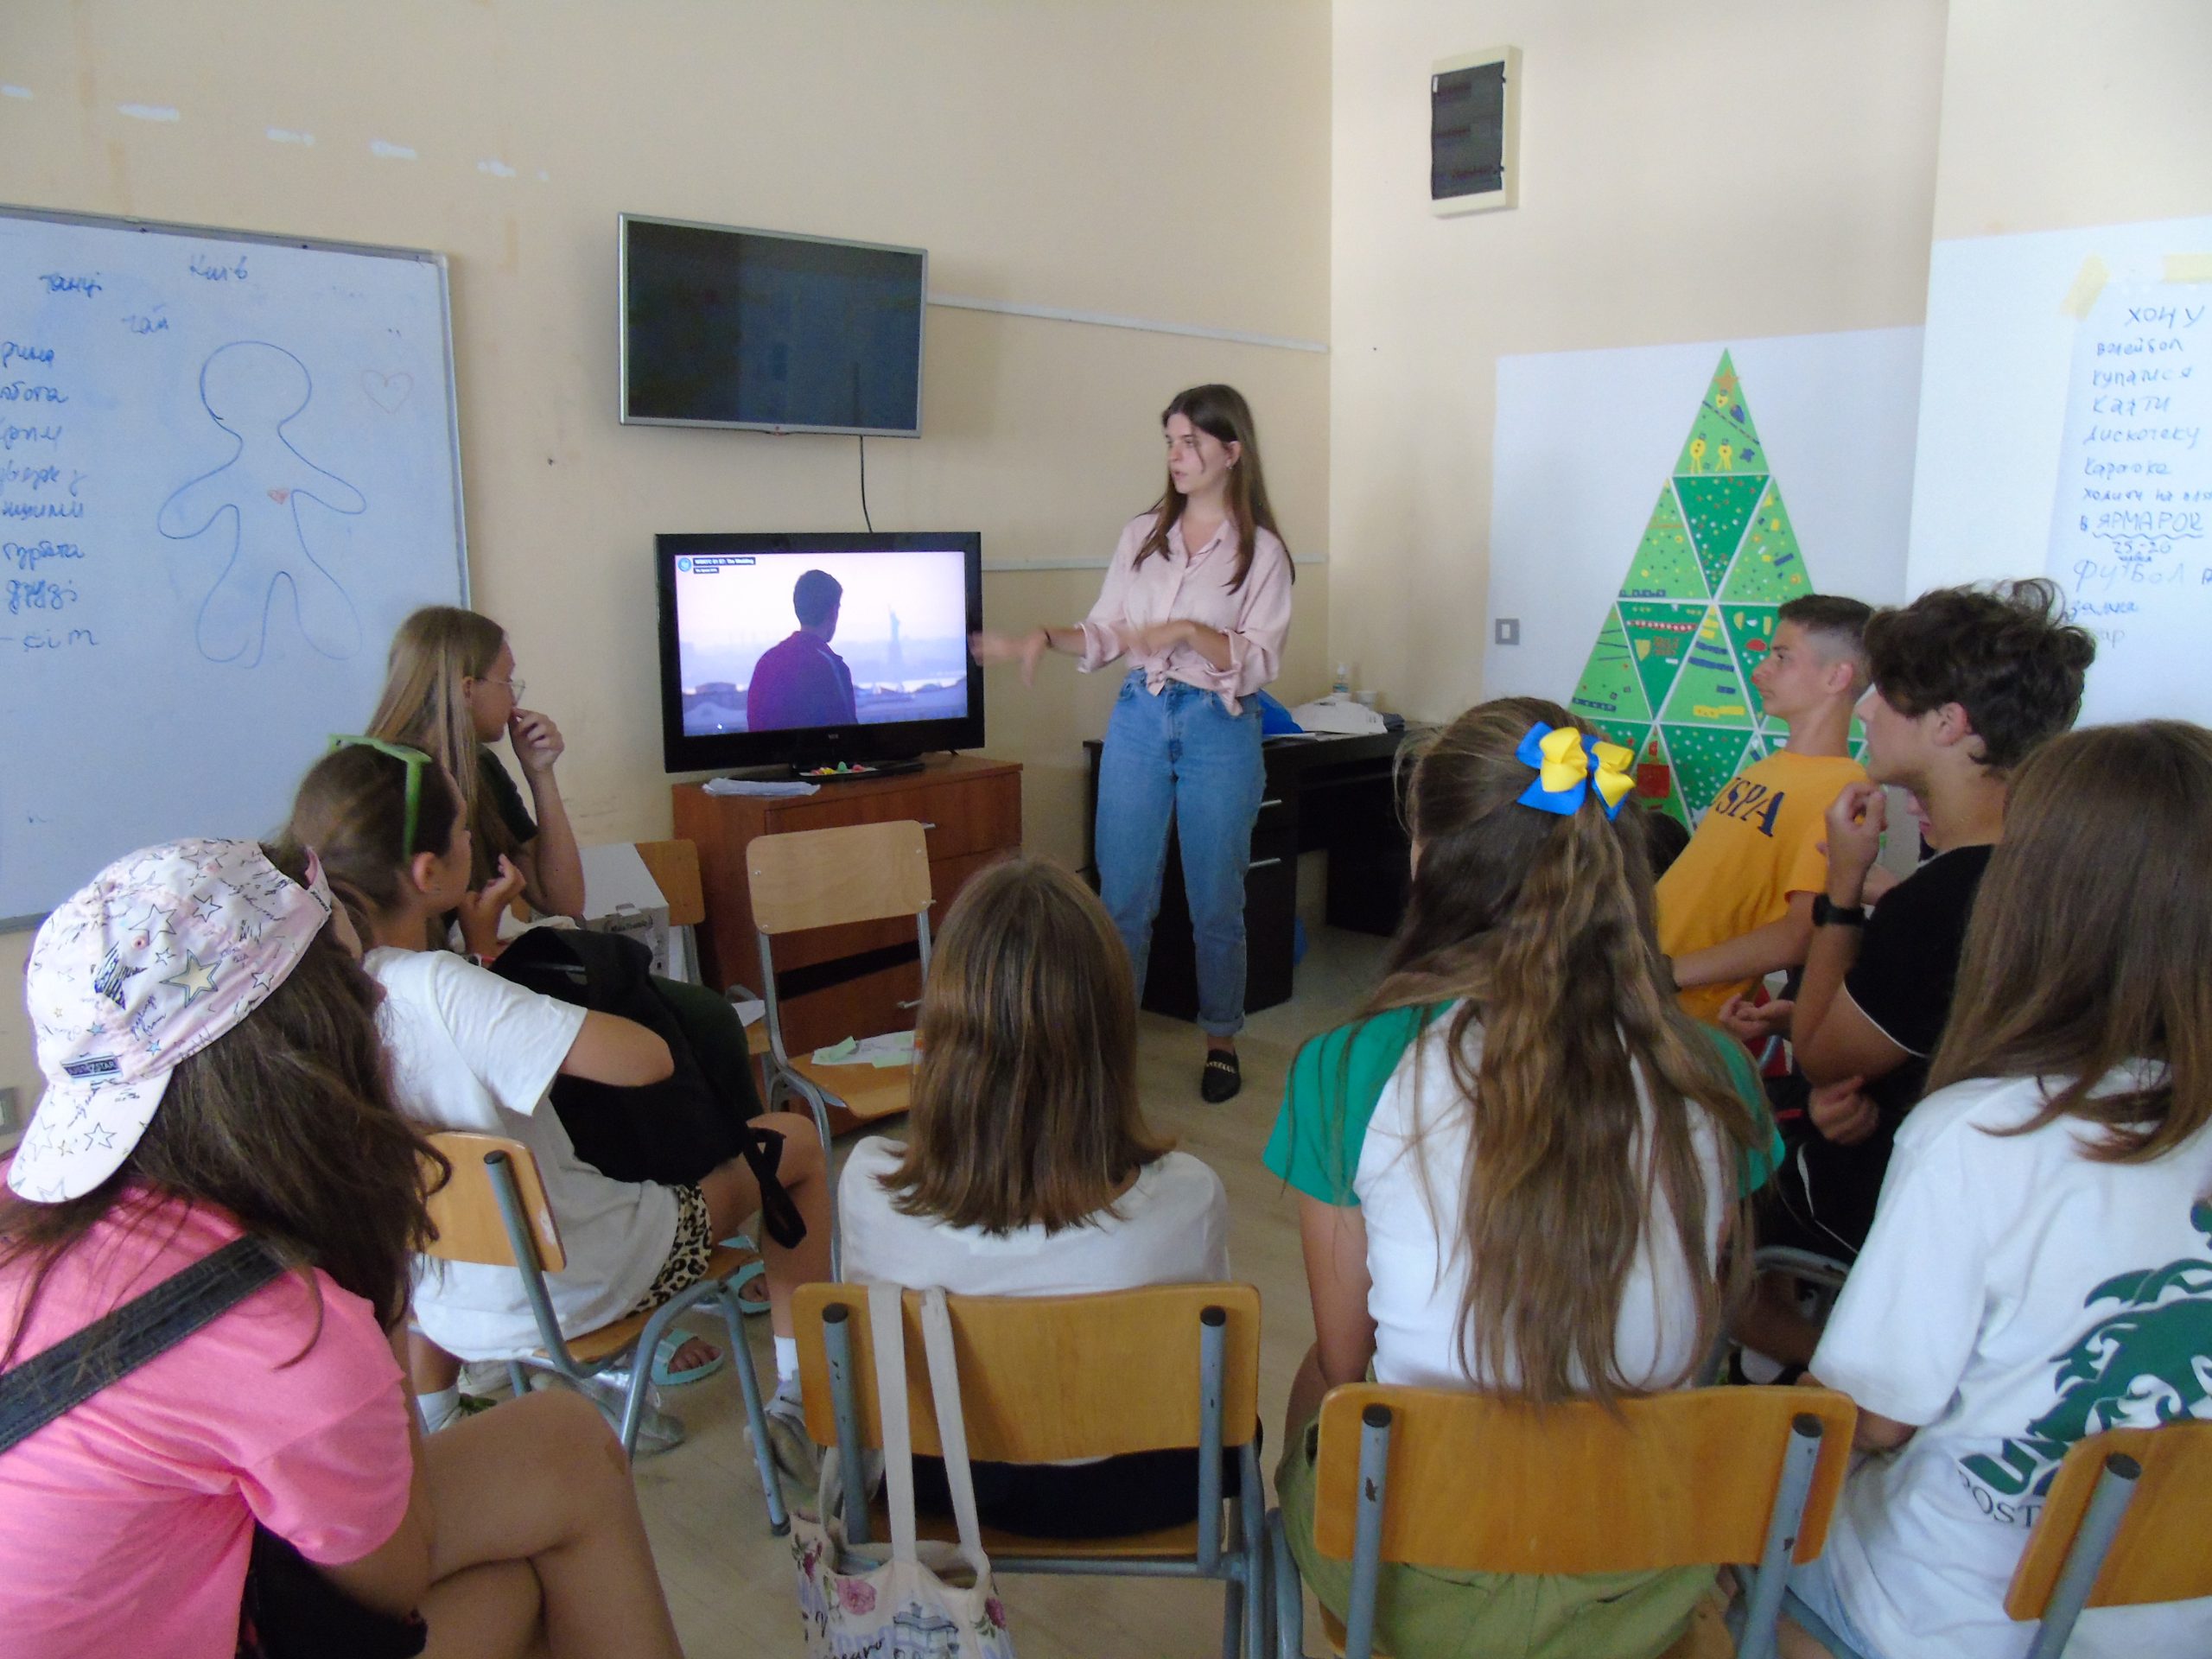 Elena Sapelyuk (SFS'23) teaches creative writing to a group of students facing her in a classroom during a summer camp in Montenegro.